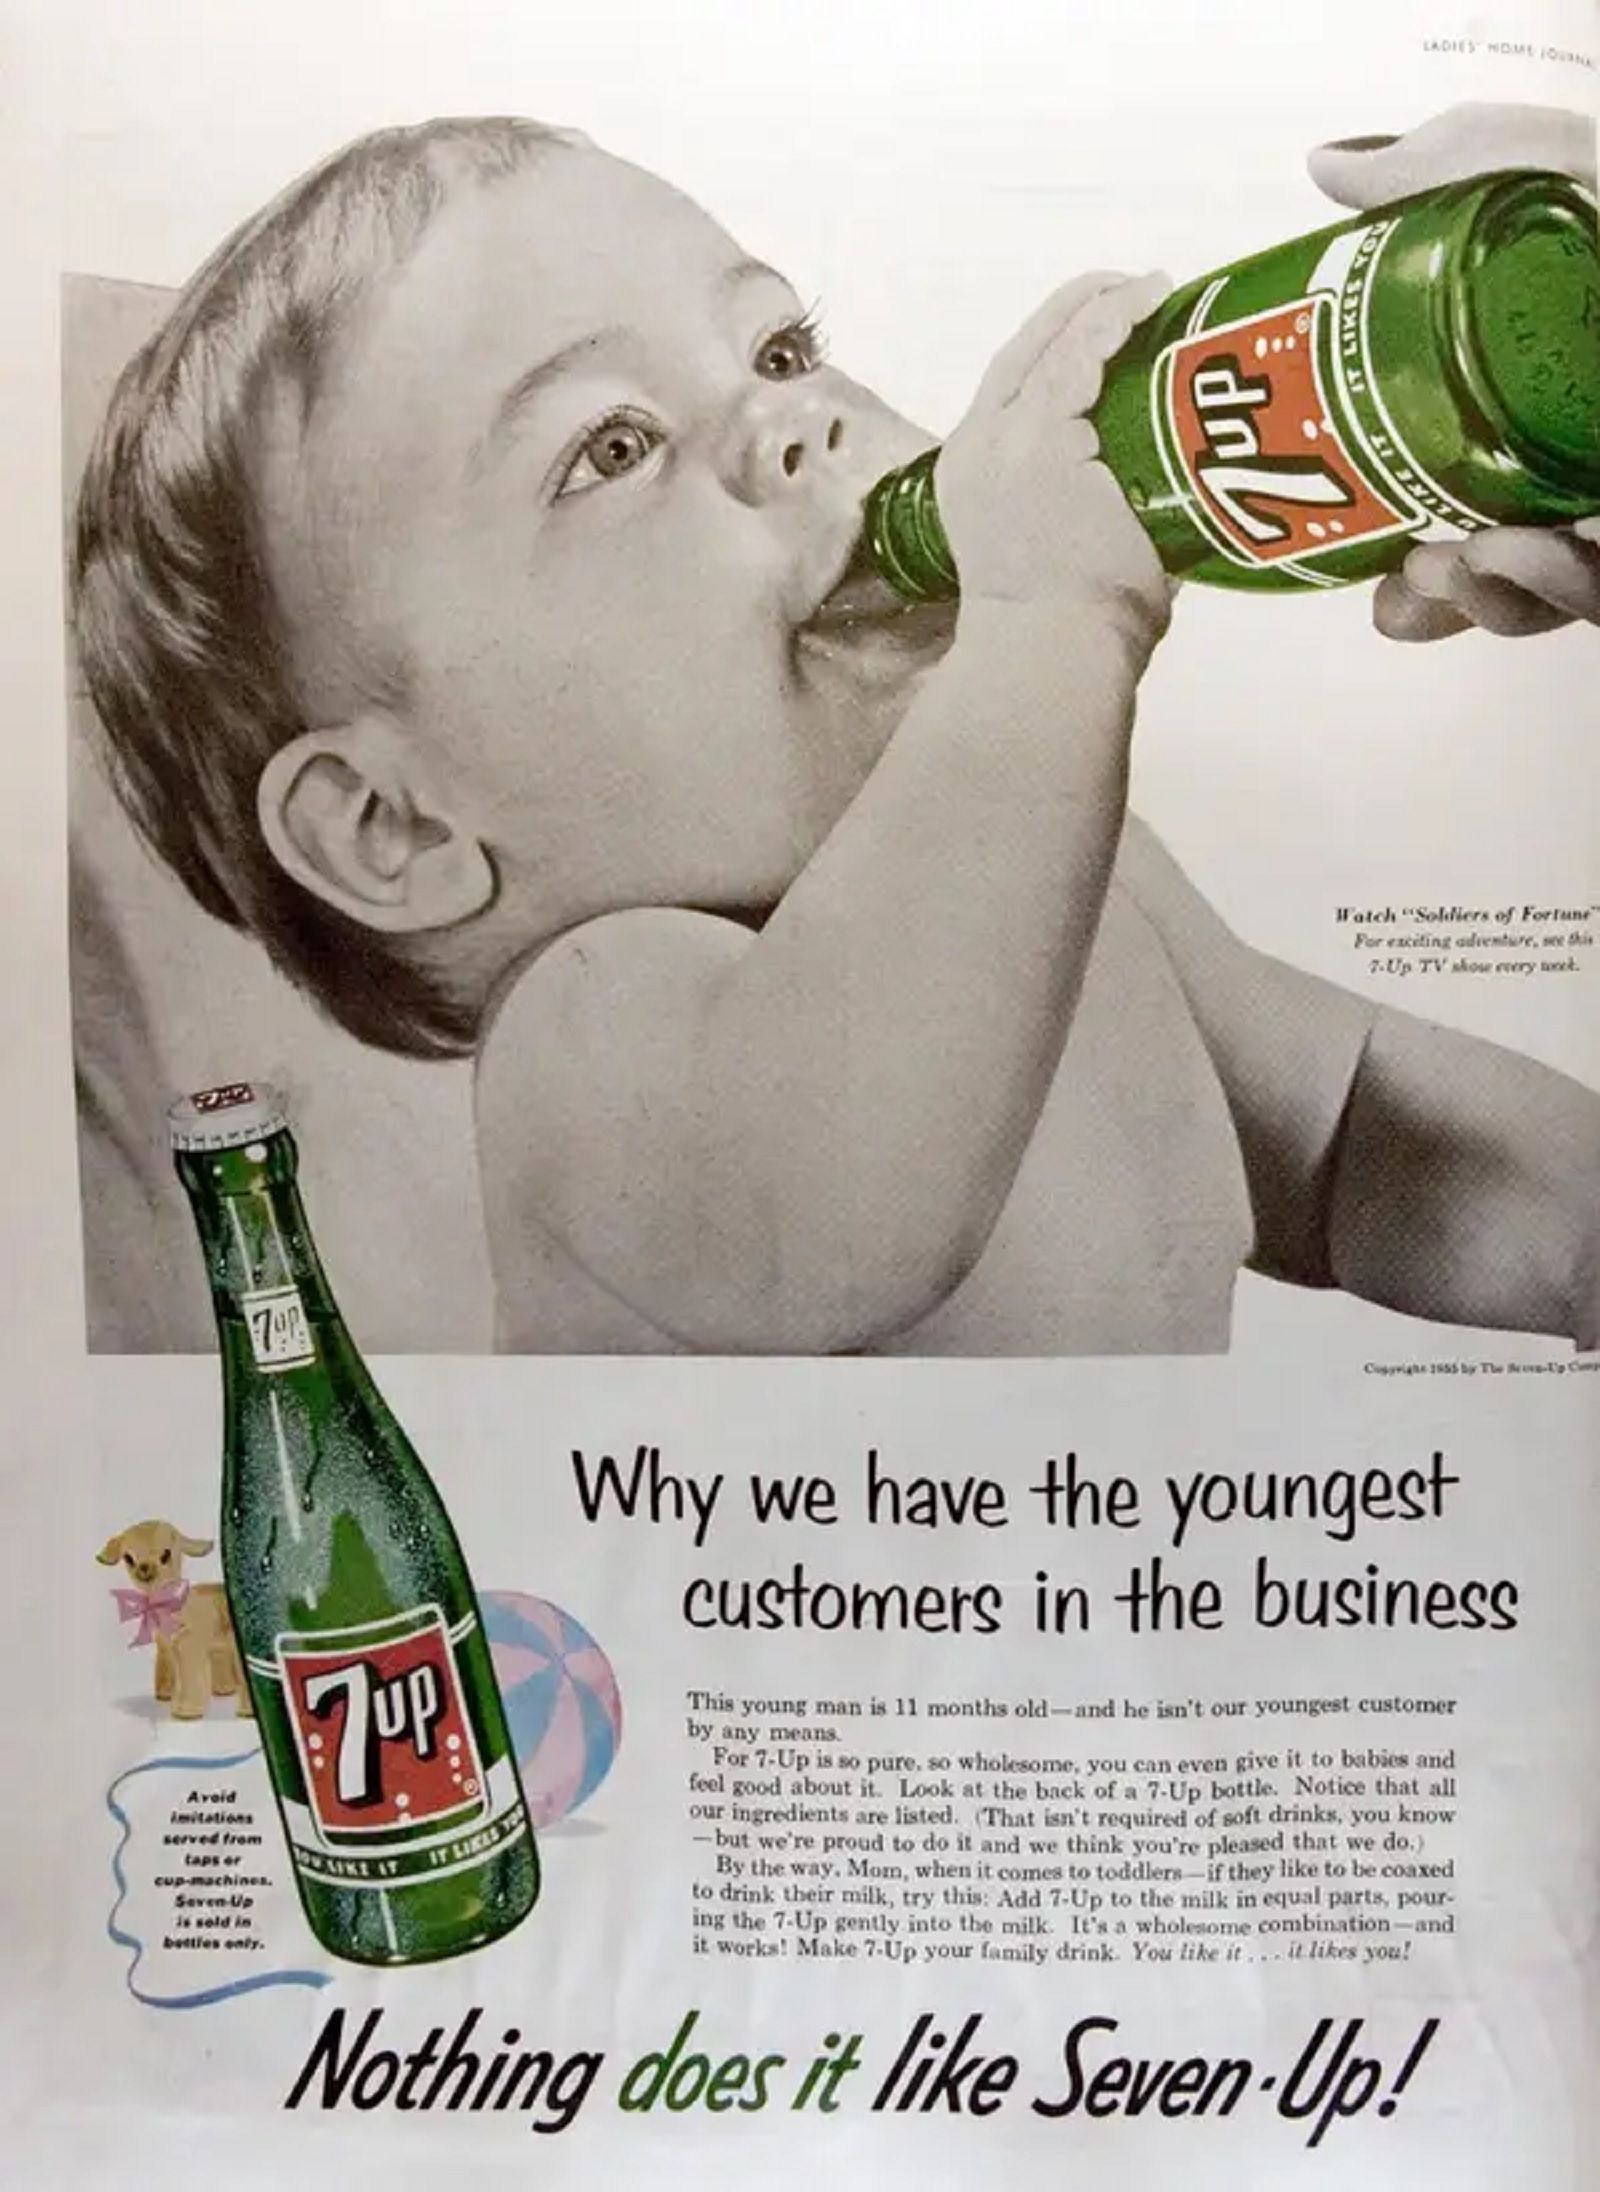 Some of the craziest adverts you're ever likely to see photo 7